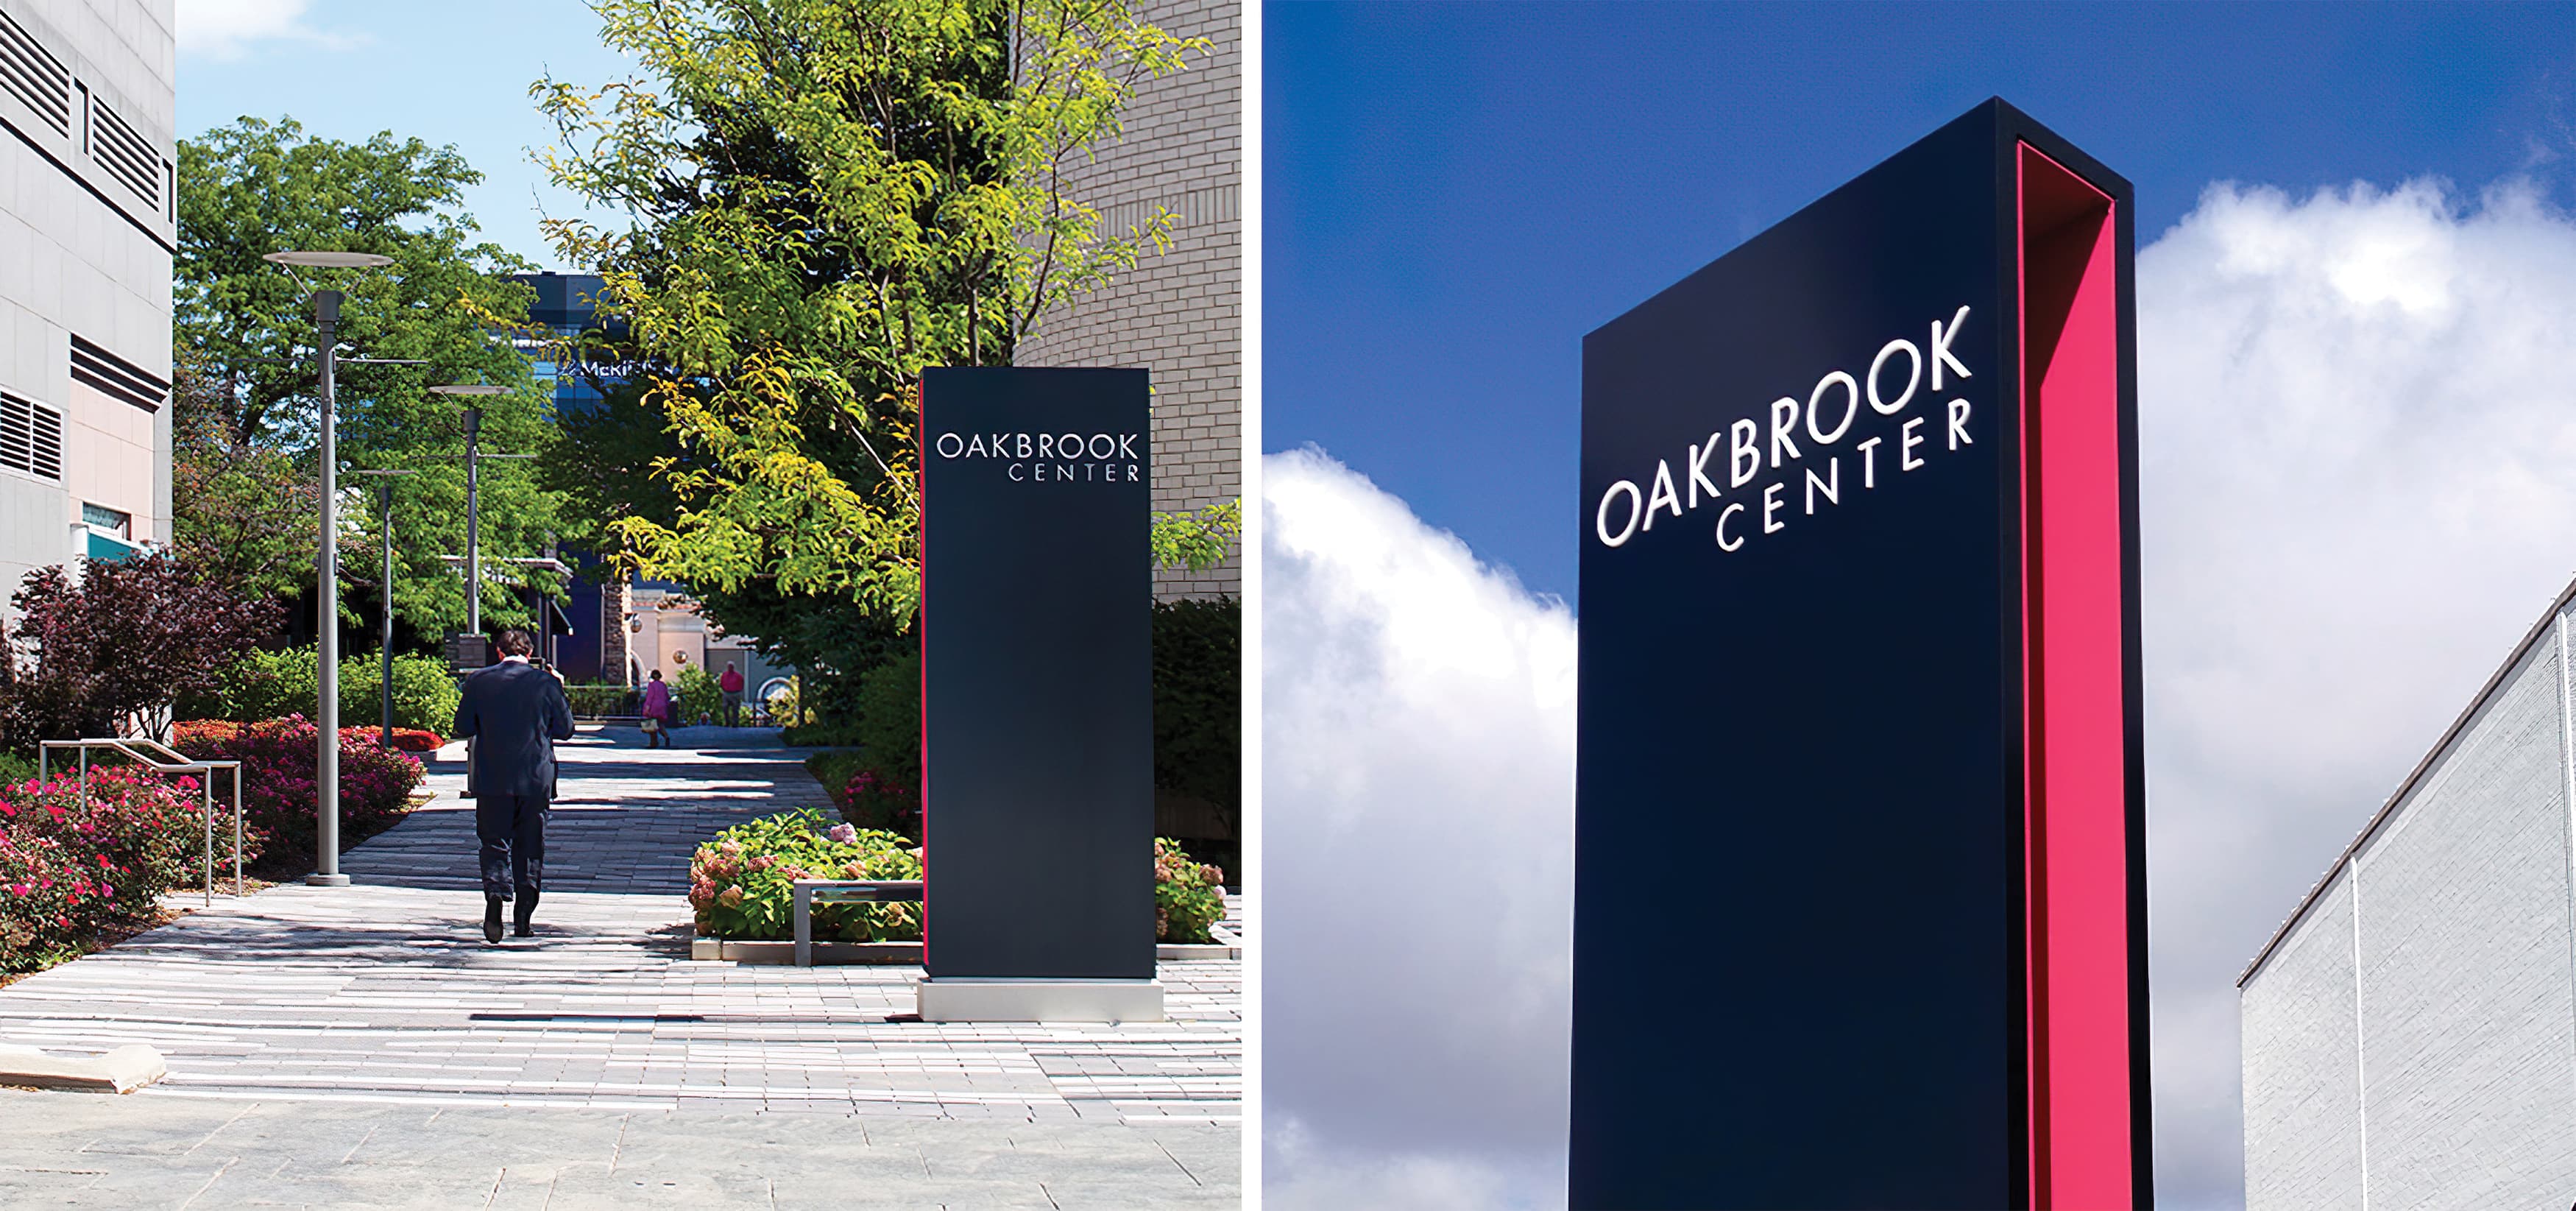 Oakbrook Center, a mixed-use shopping center in Oakbrook, Illinois. Project Identity Signage.